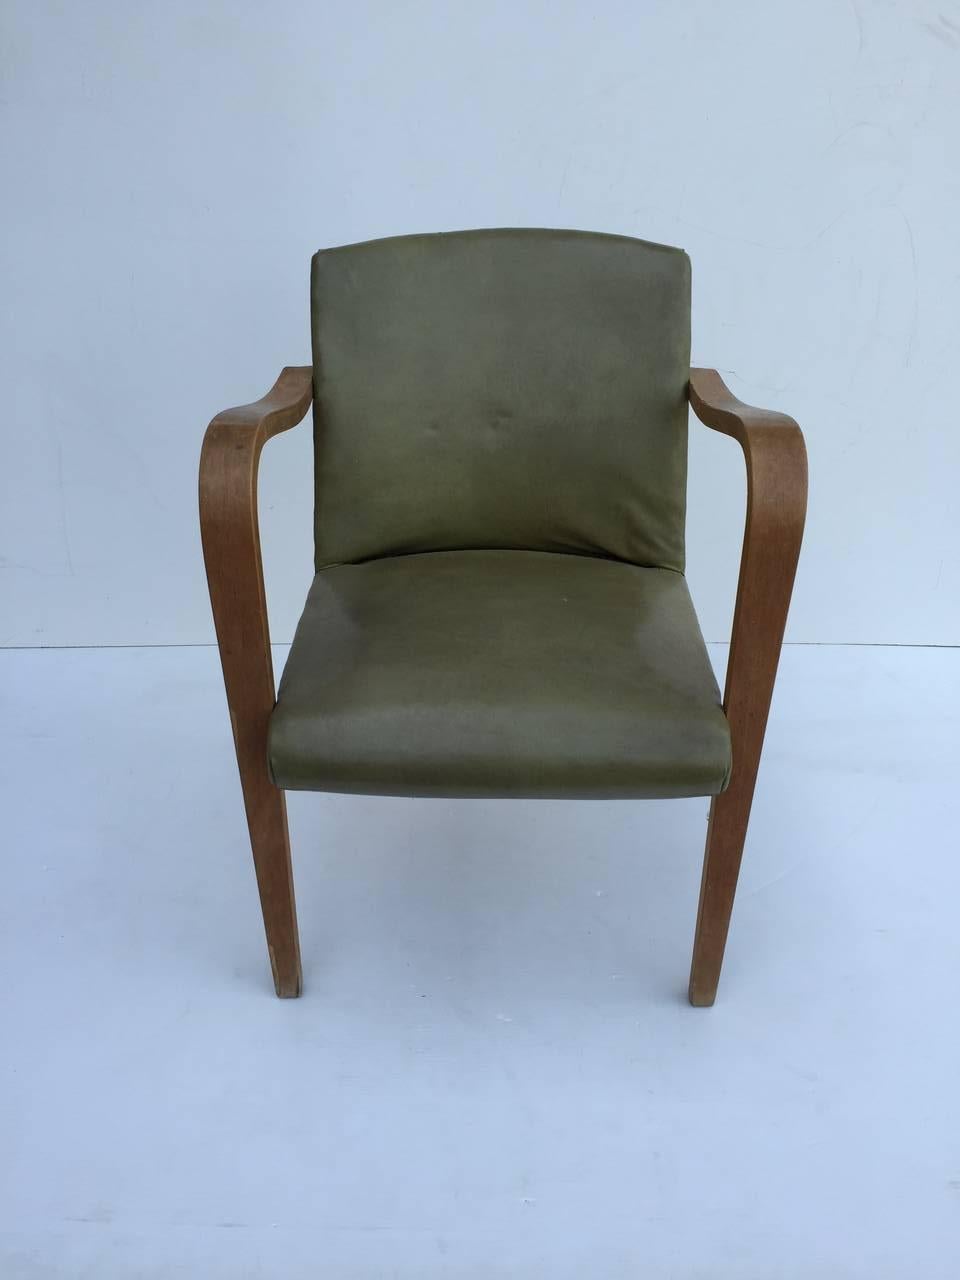 Pair of small bentwood armchairs, this item is on sale for clearance price to liquidate our inventory.